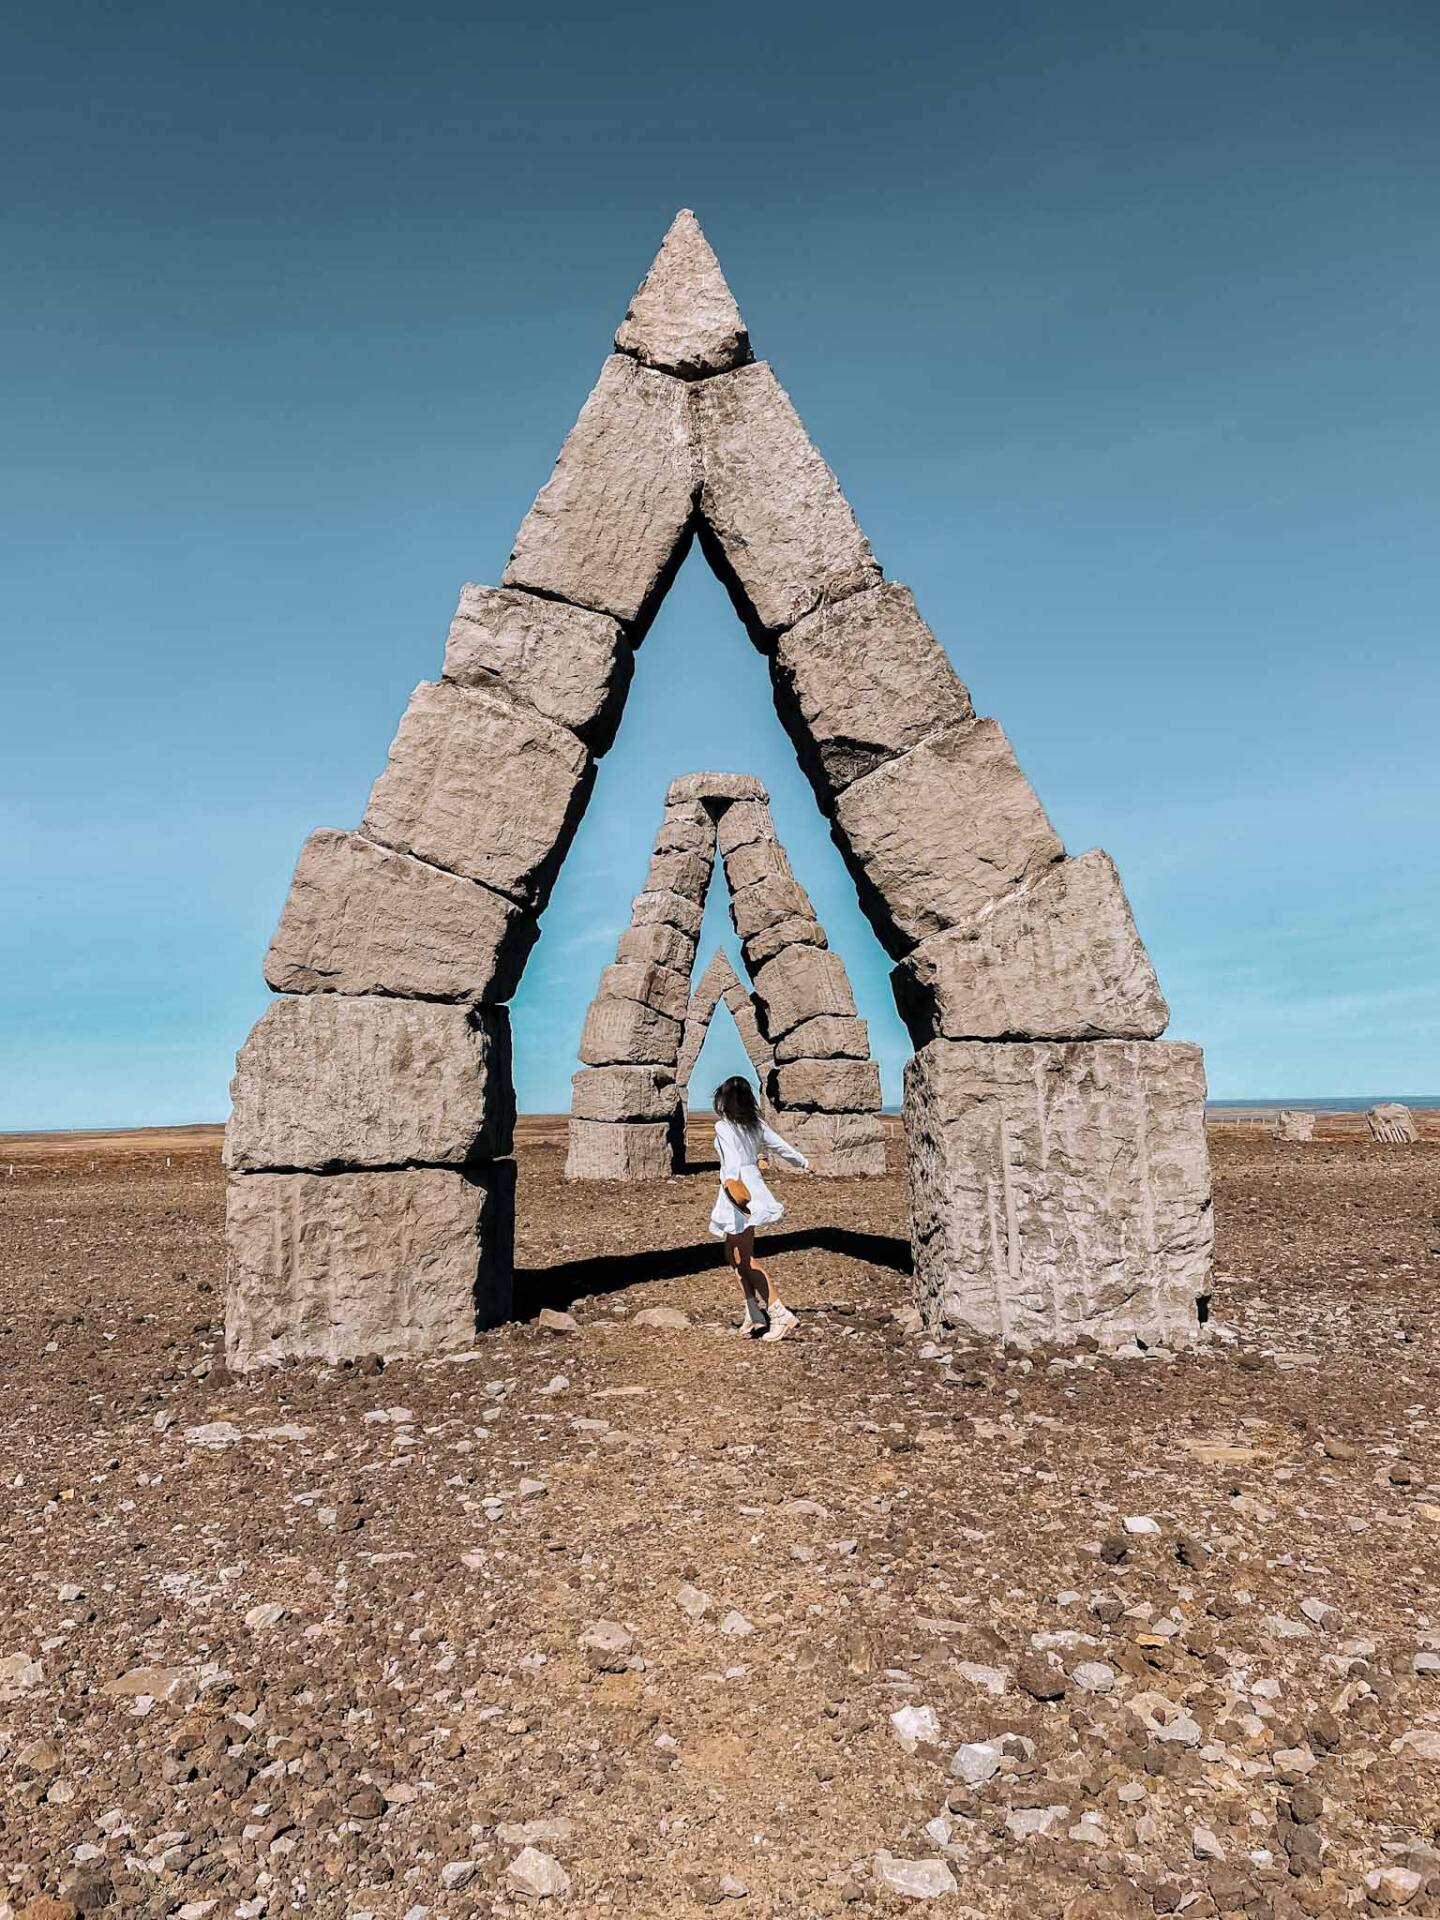 Unique spots and hidden gems - Natural stone arches in Iceland - The Arctic Henge